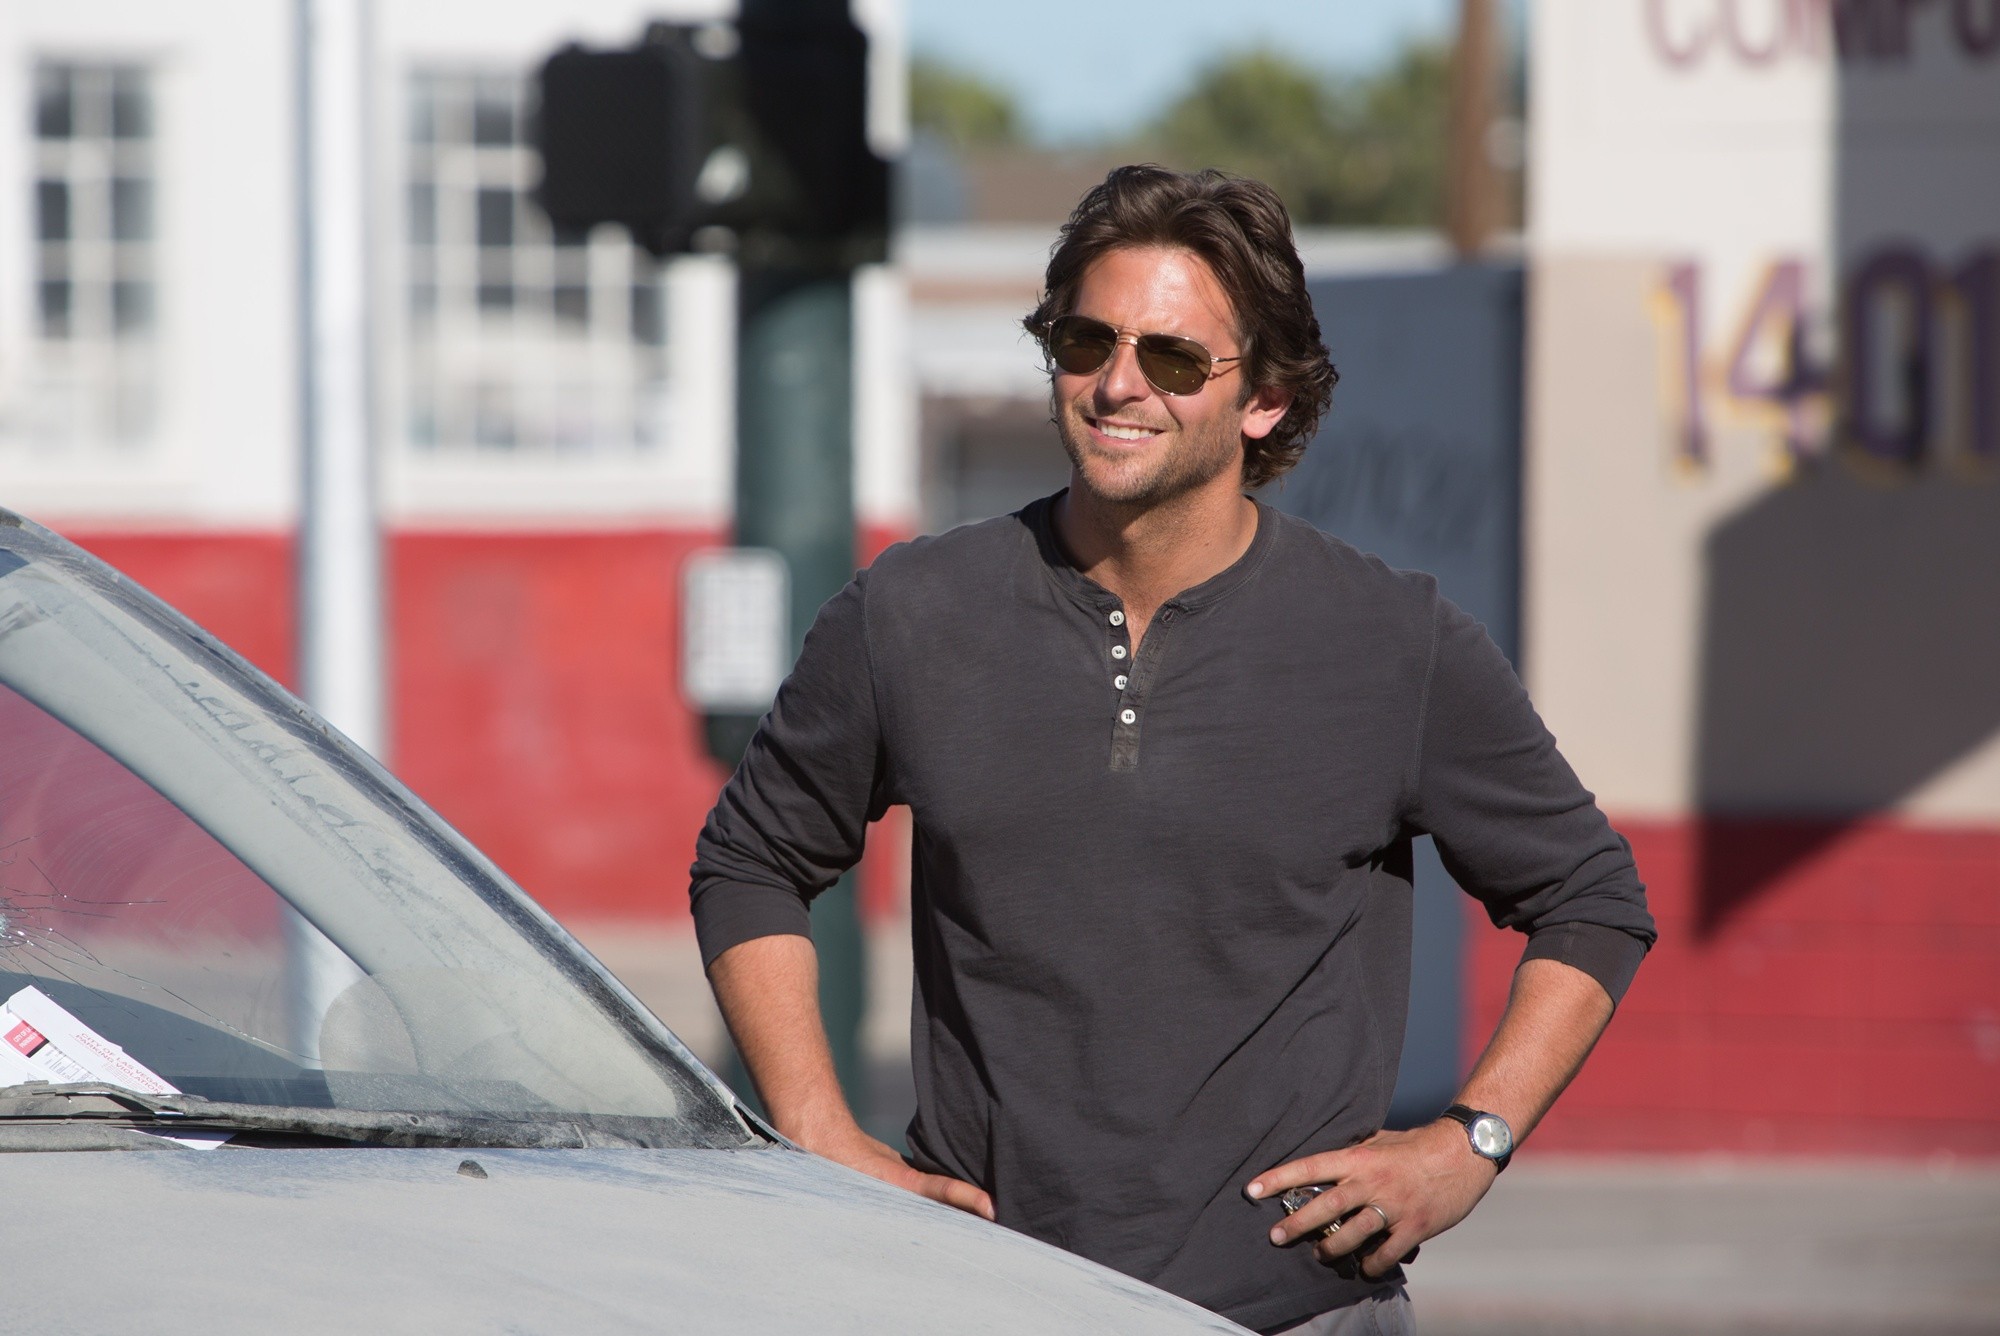 Bradley Cooper stars as Phil in Warner Bros. Pictures' The Hangover Part III (2013)